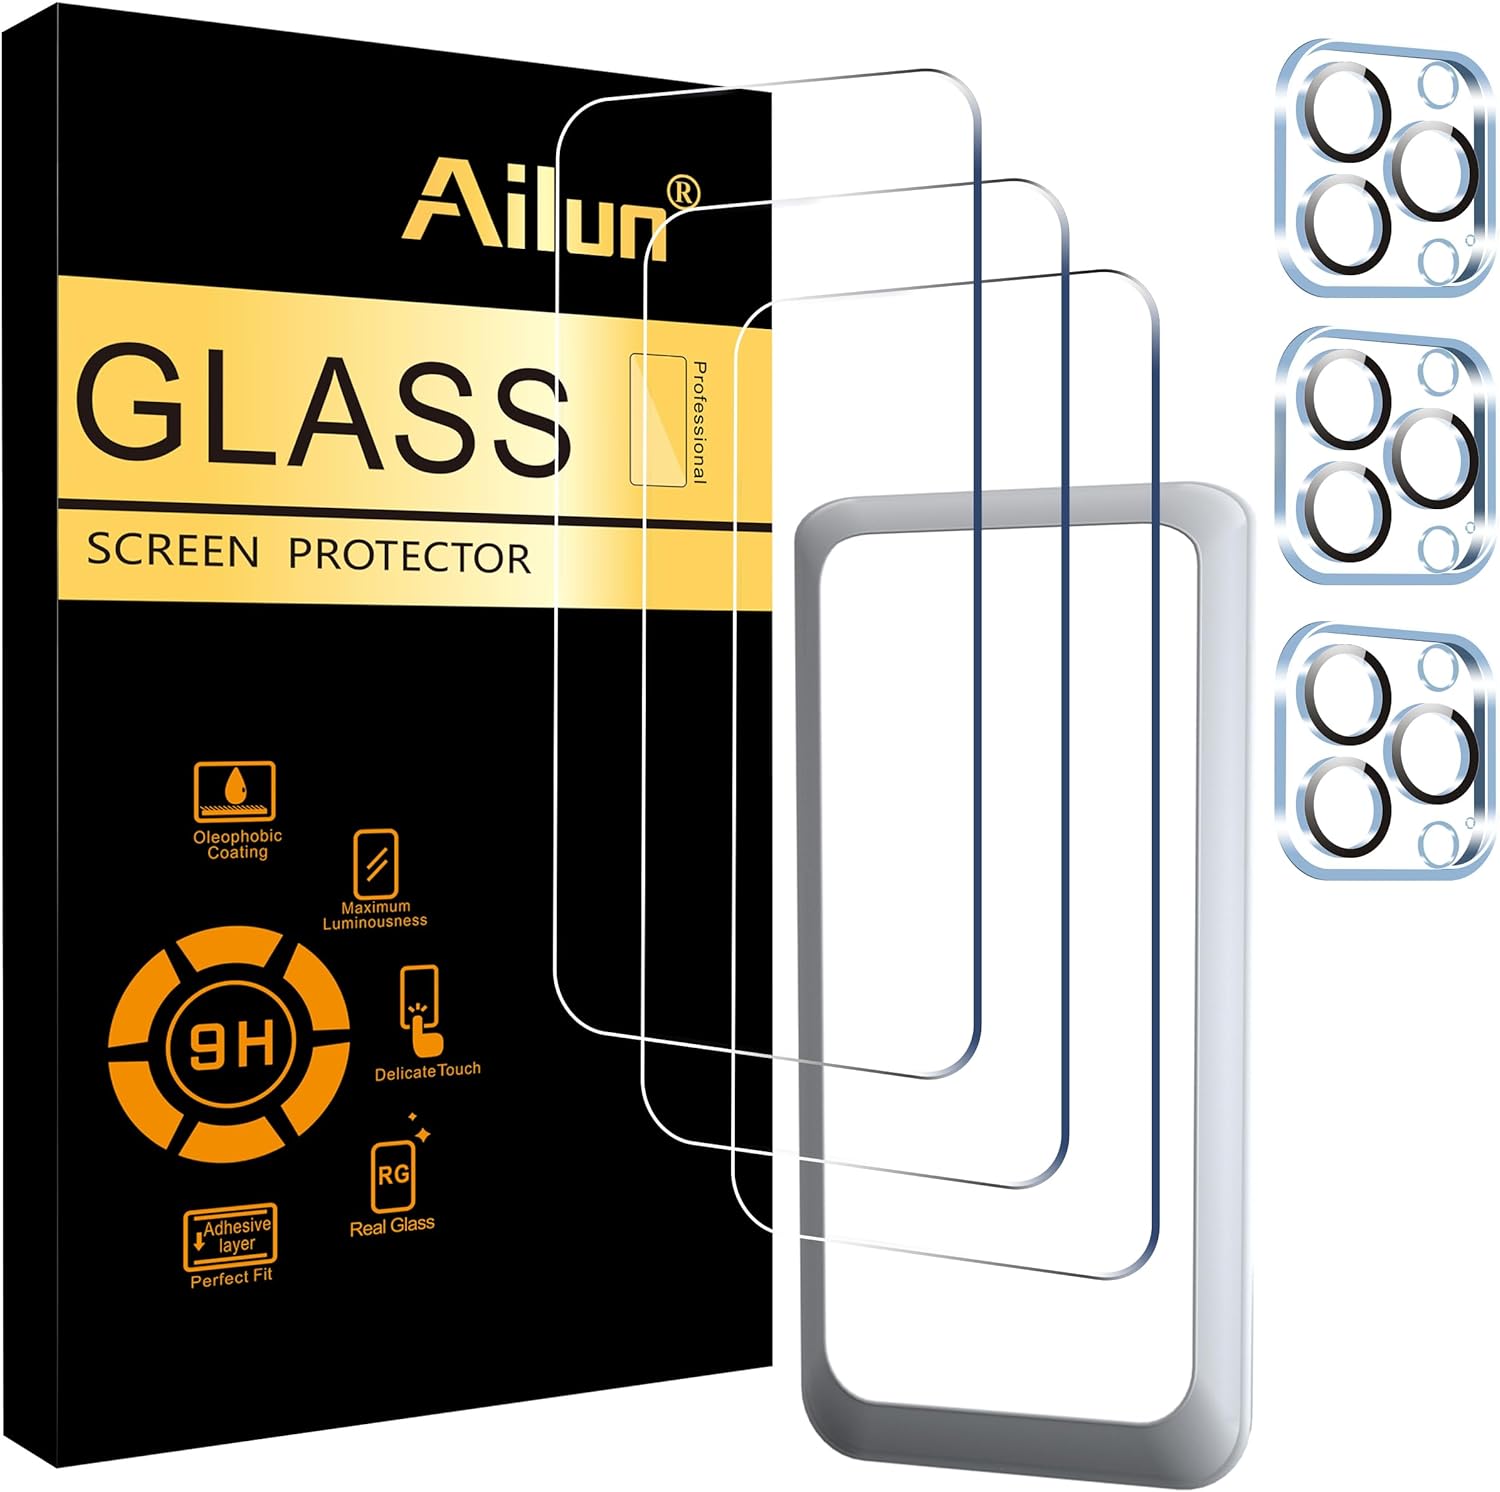 iPhone Screen Protector Promax – Ailun 3-Pack: Affordable and Effective